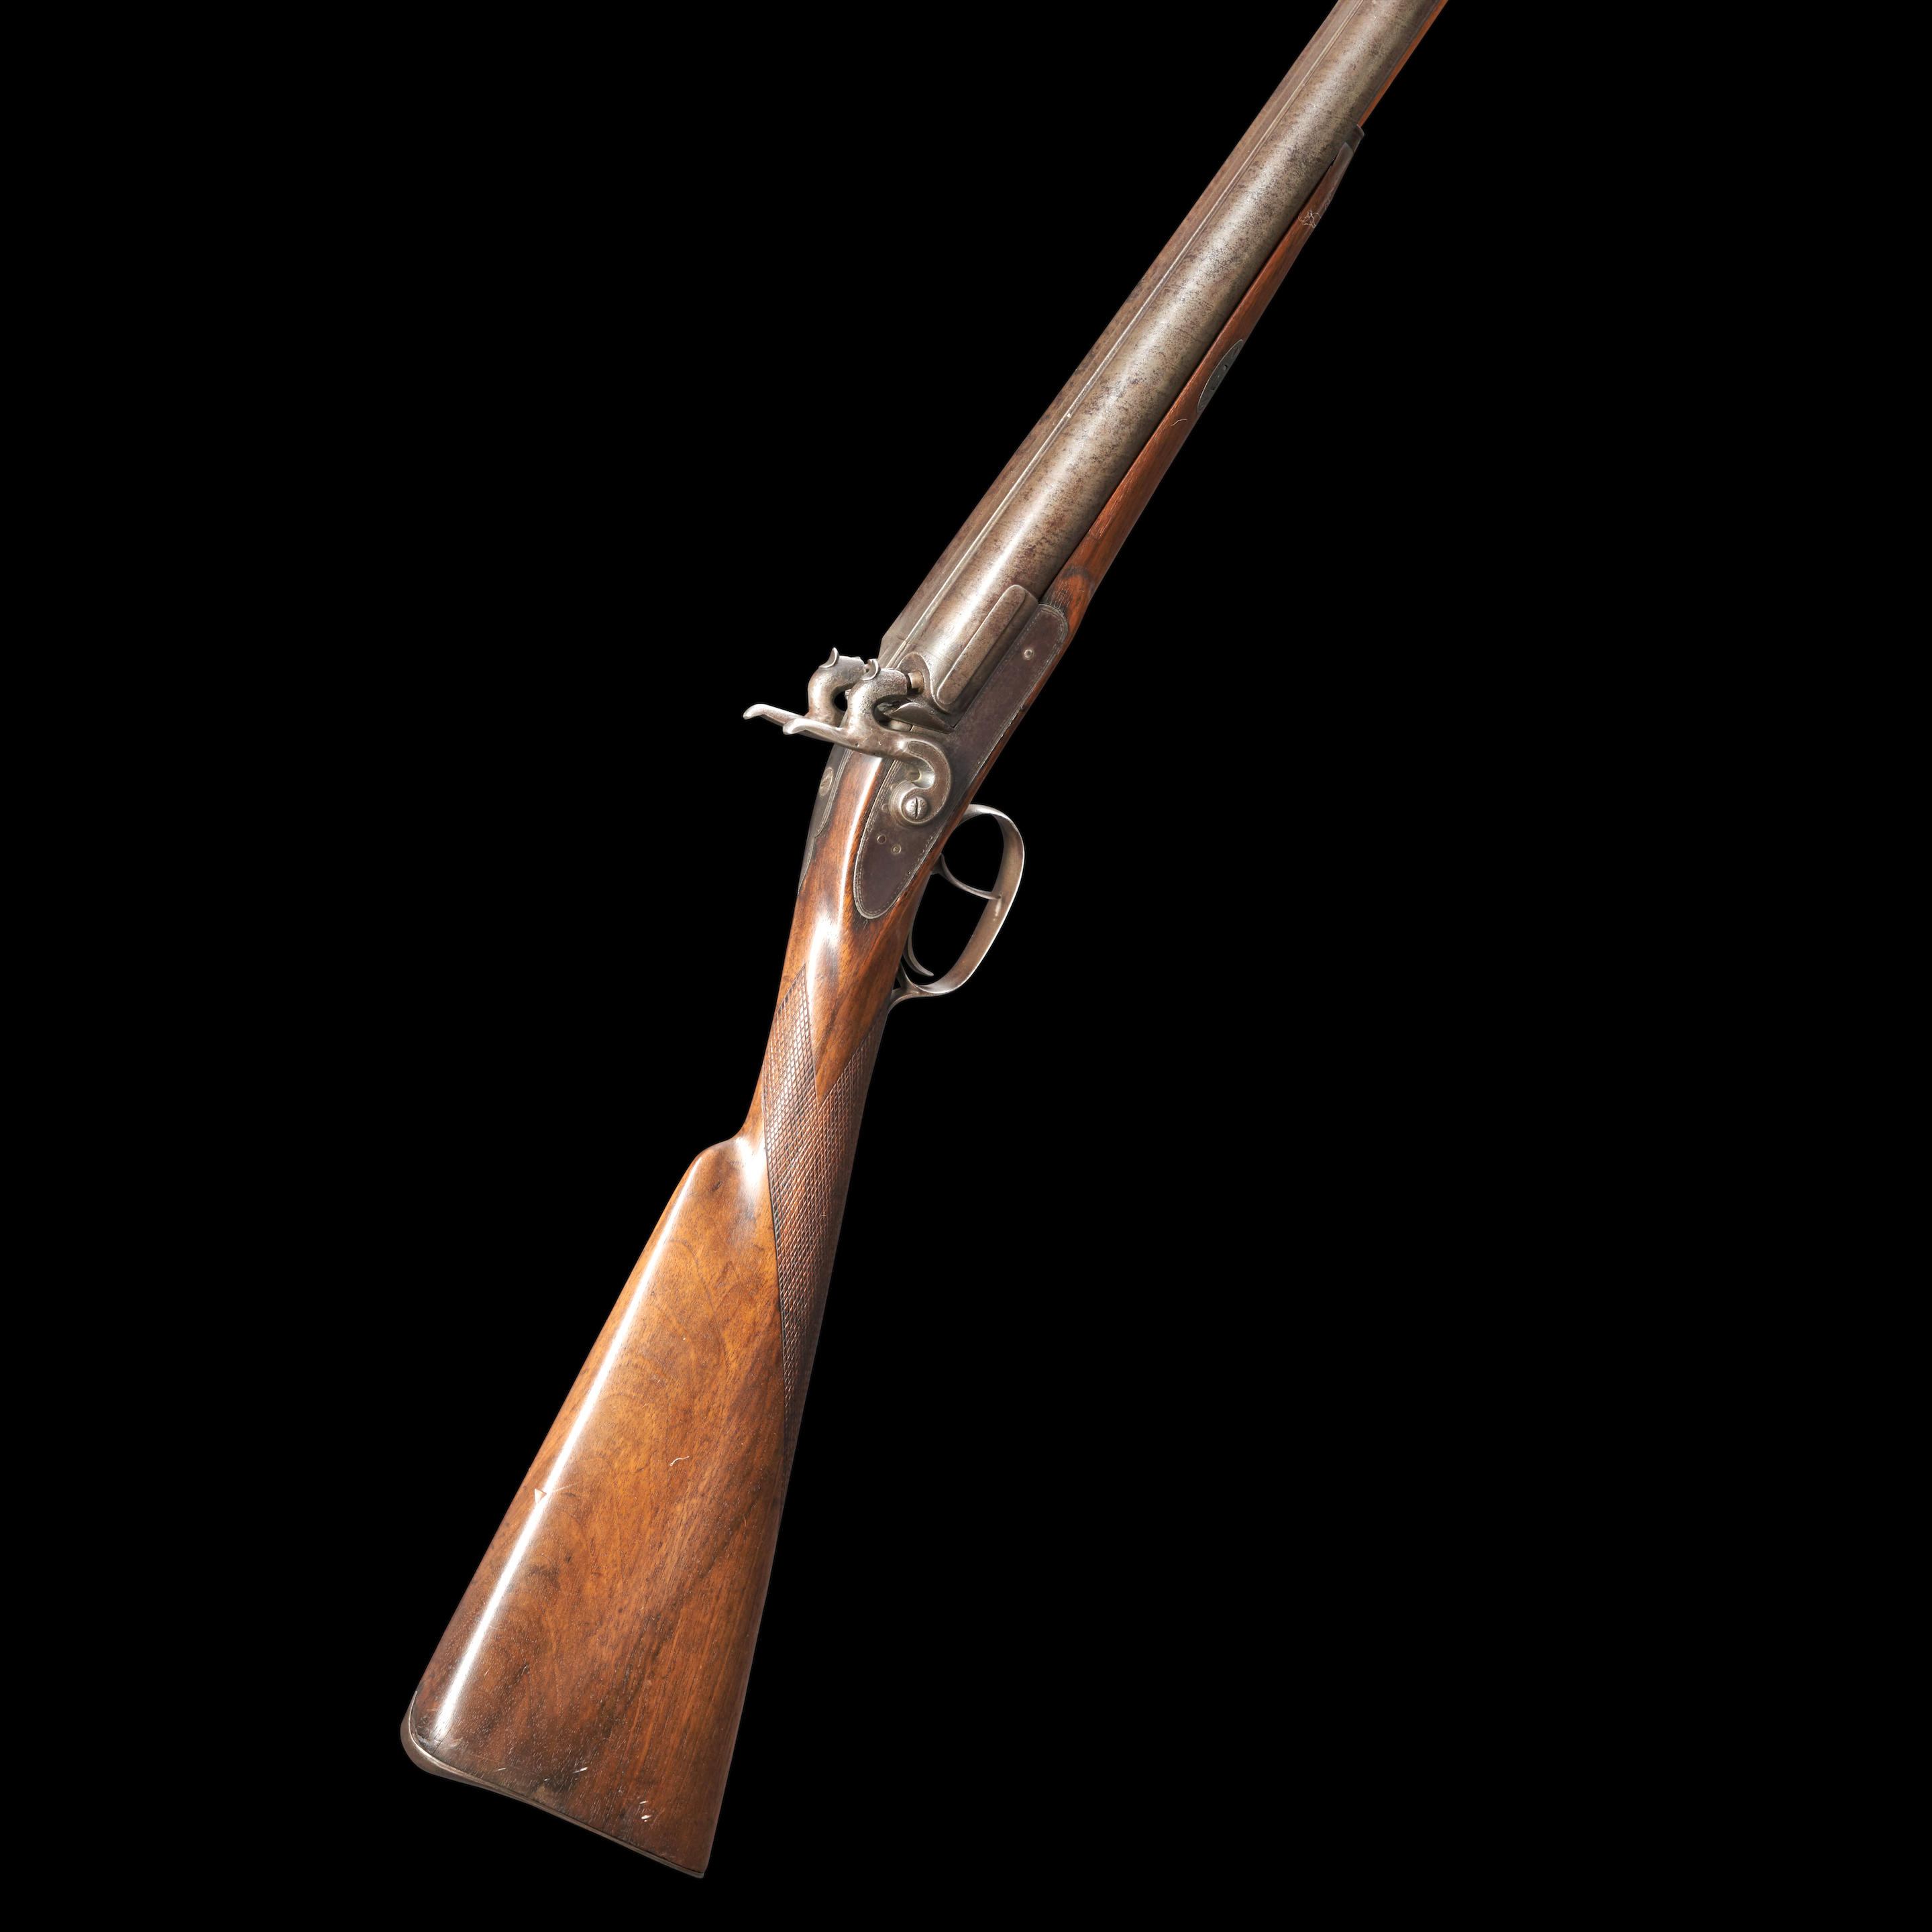 Bonhams Cars : Daisy Model 95 Air Rifle Used by the United States Army for  Quick Kill Training